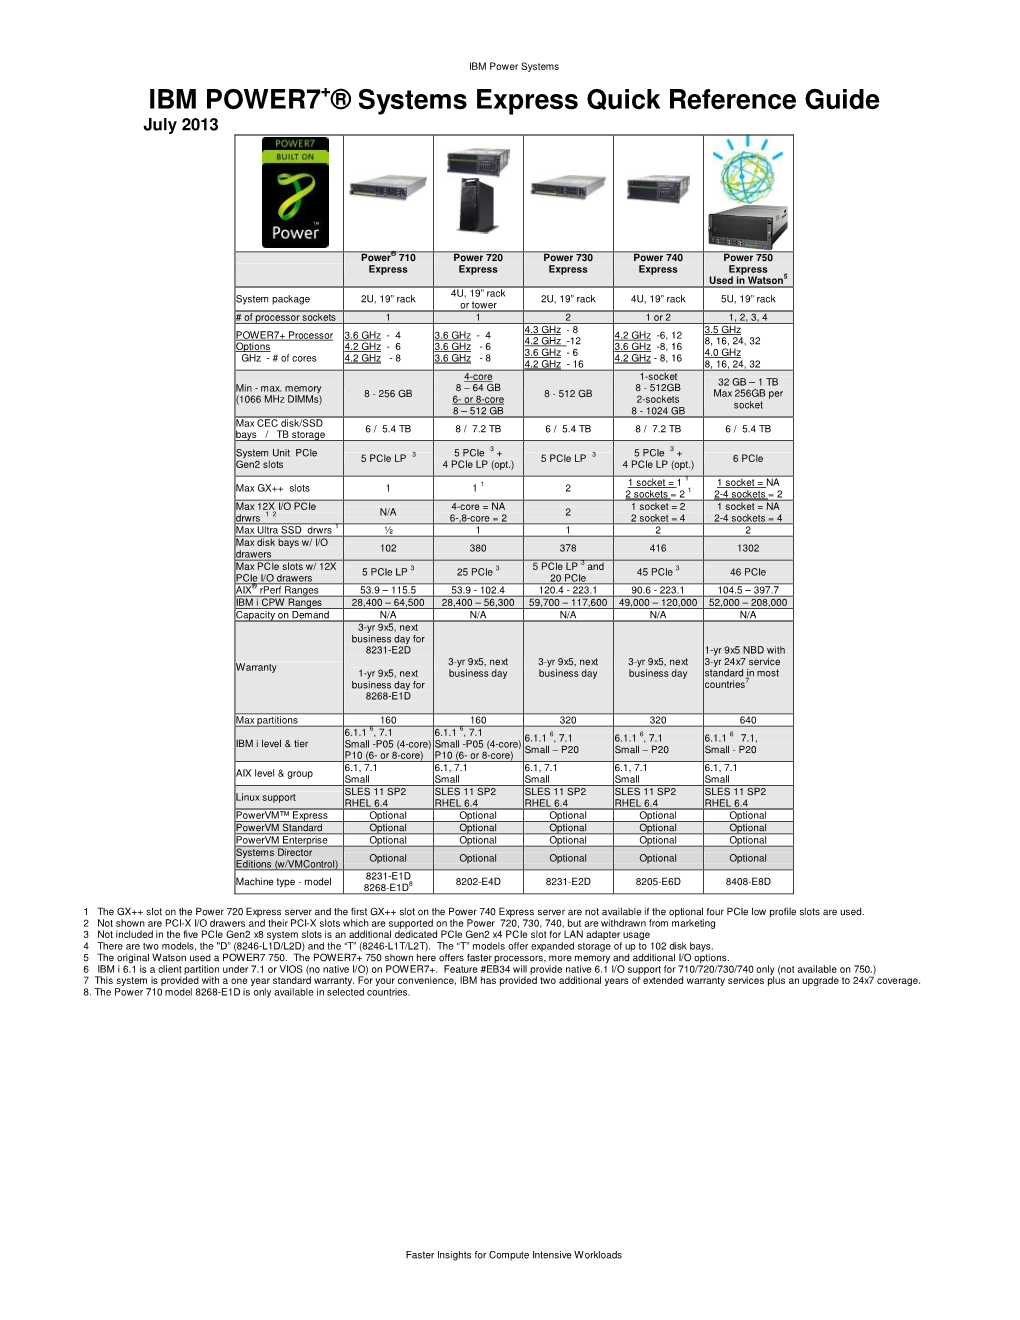 IBM POWER7 +® Systems Express Quick Reference Guide July 2013